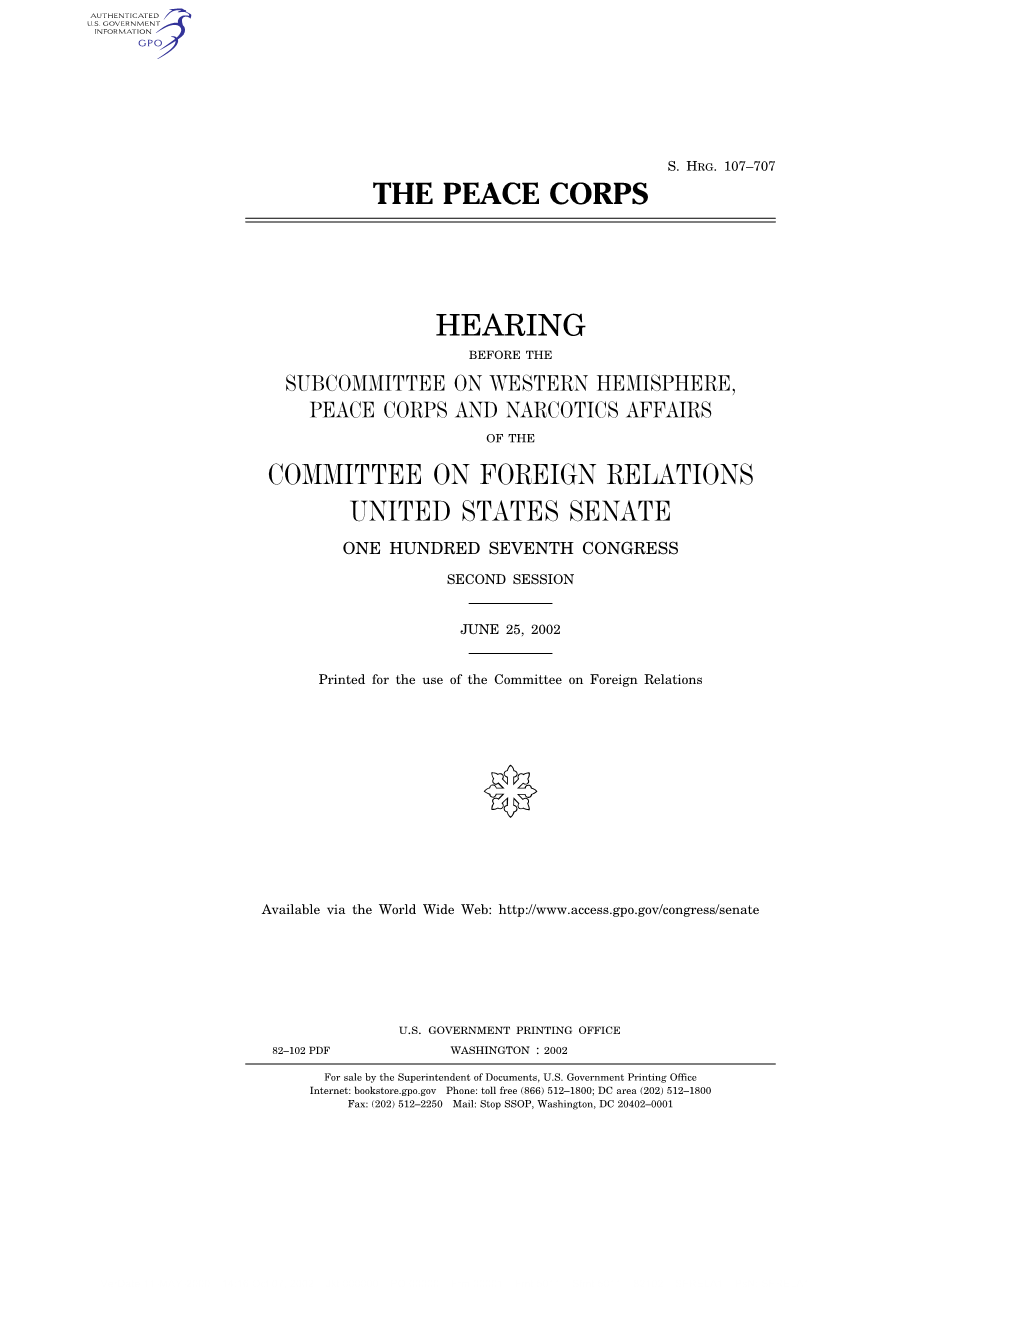 The Peace Corps Hearing Committee on Foreign